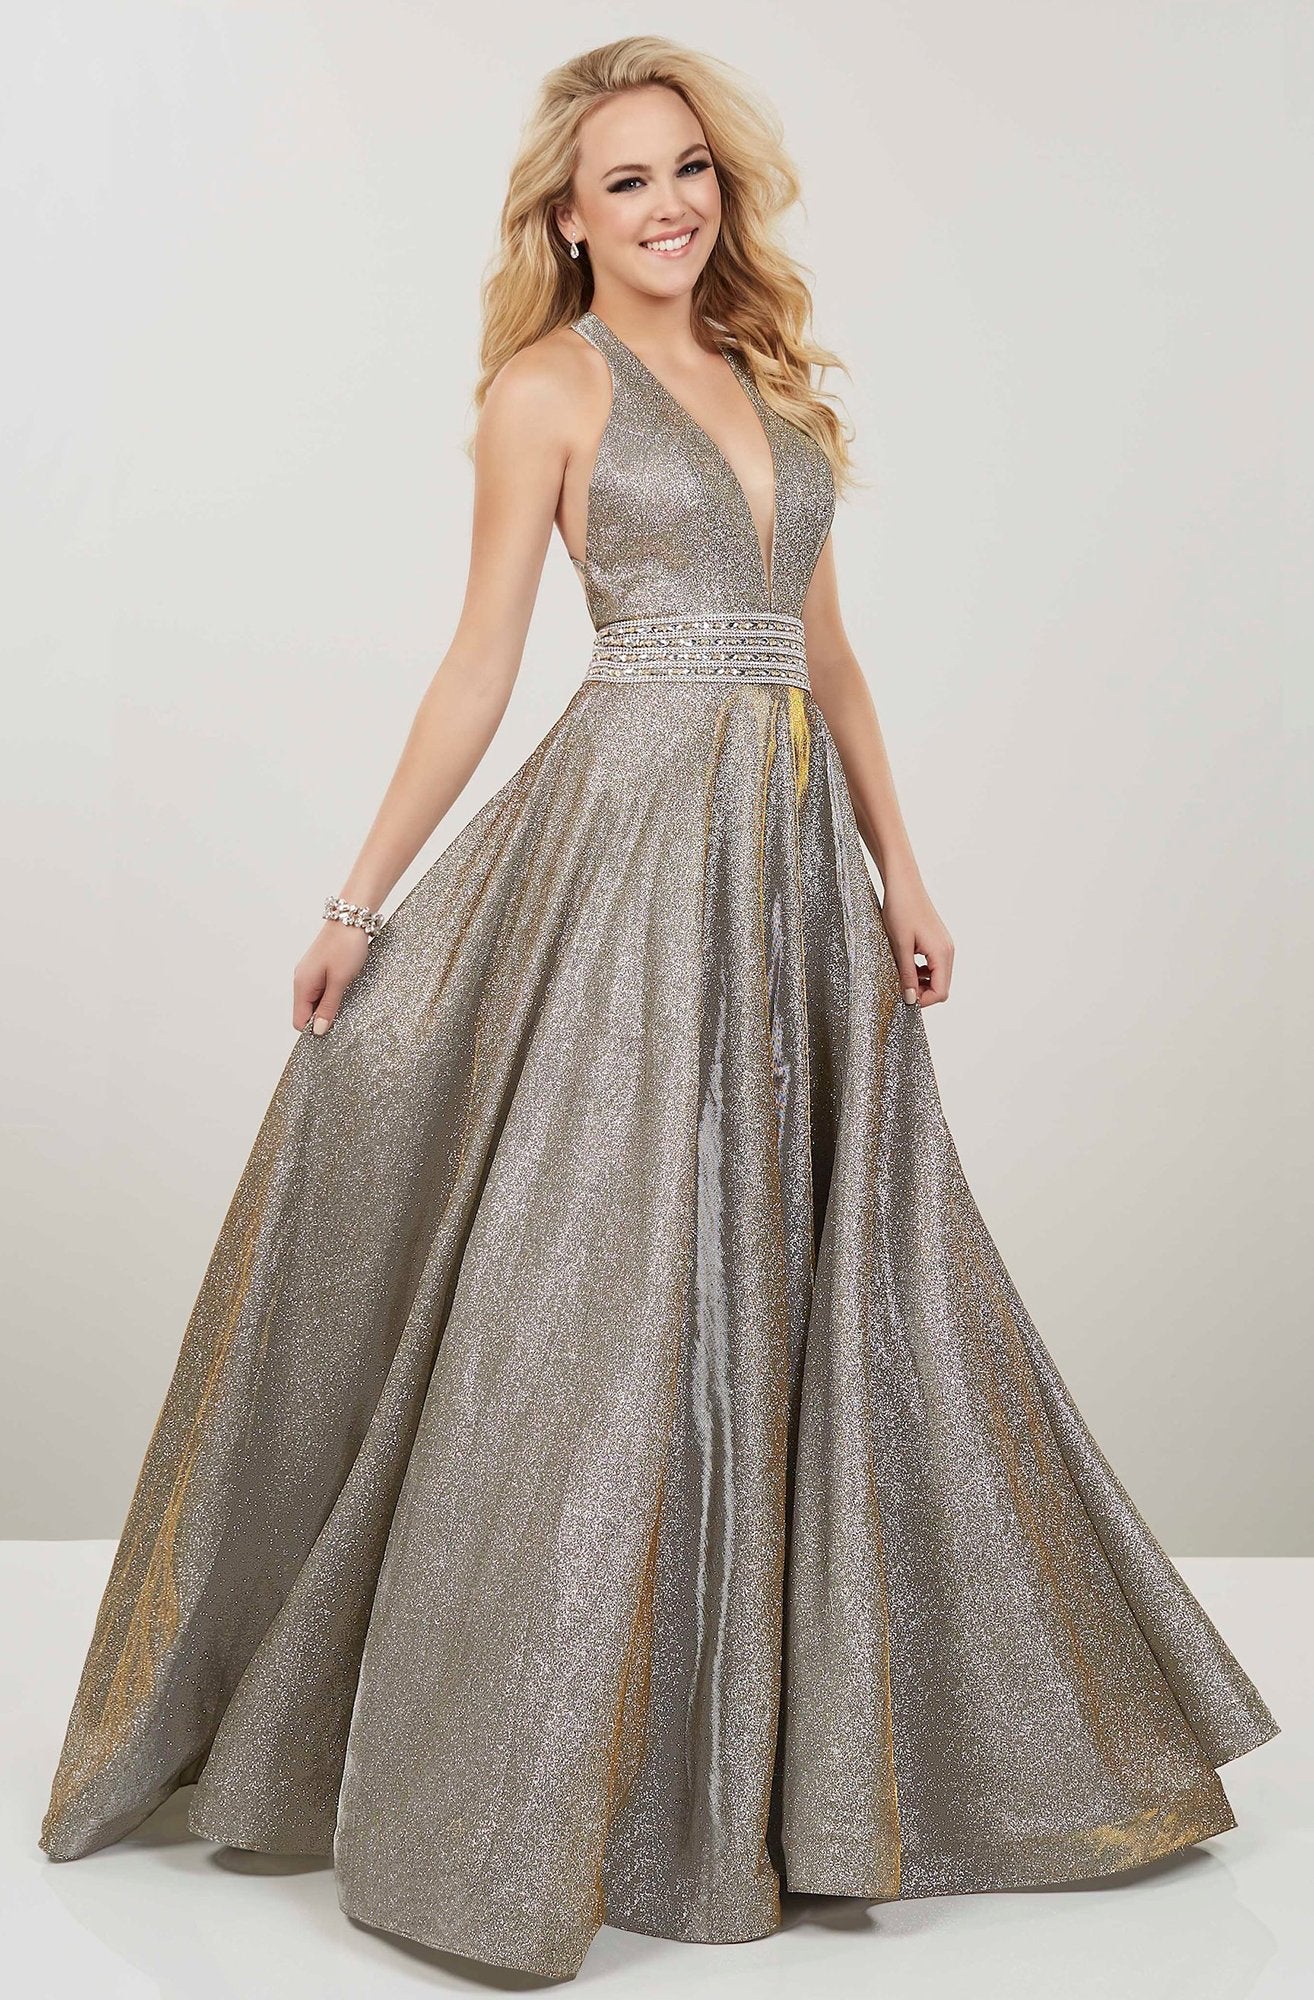 Panoply - 14926 Plunging V-Neck Embellished Ballgown In Gold